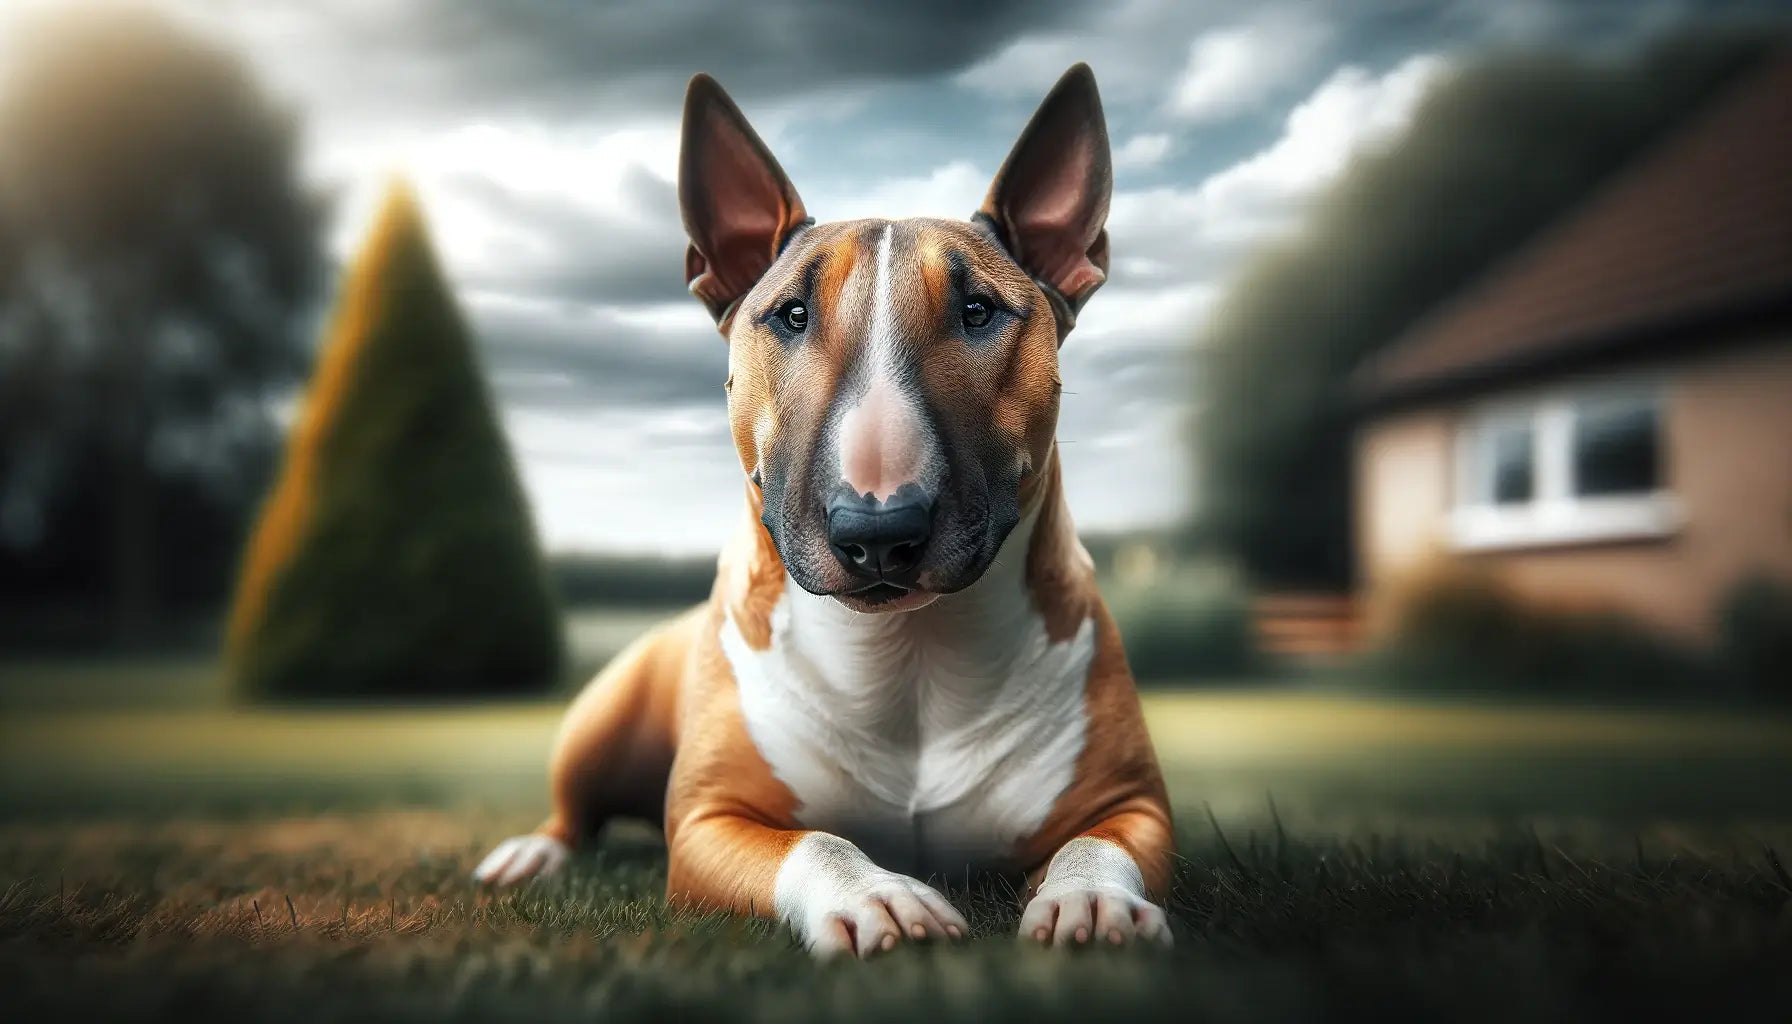 A Bull Terrier lies on the grass, showcasing a determined look and focused eyes that reflect its energetic and robust nature.